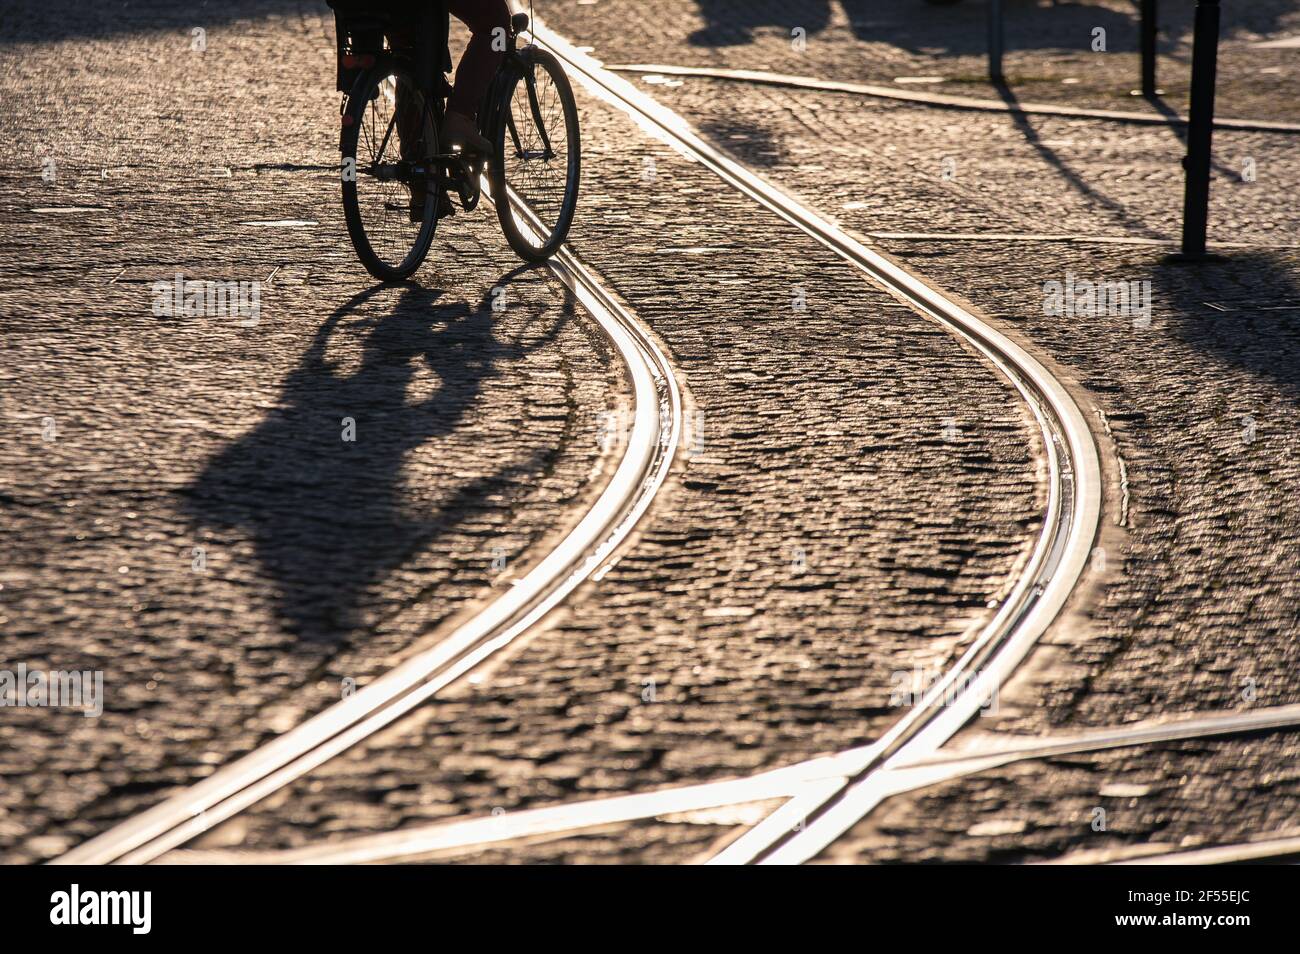 City life depicted with a cyclist in the sunrise on a cobblestone street with tram rails Stock Photo